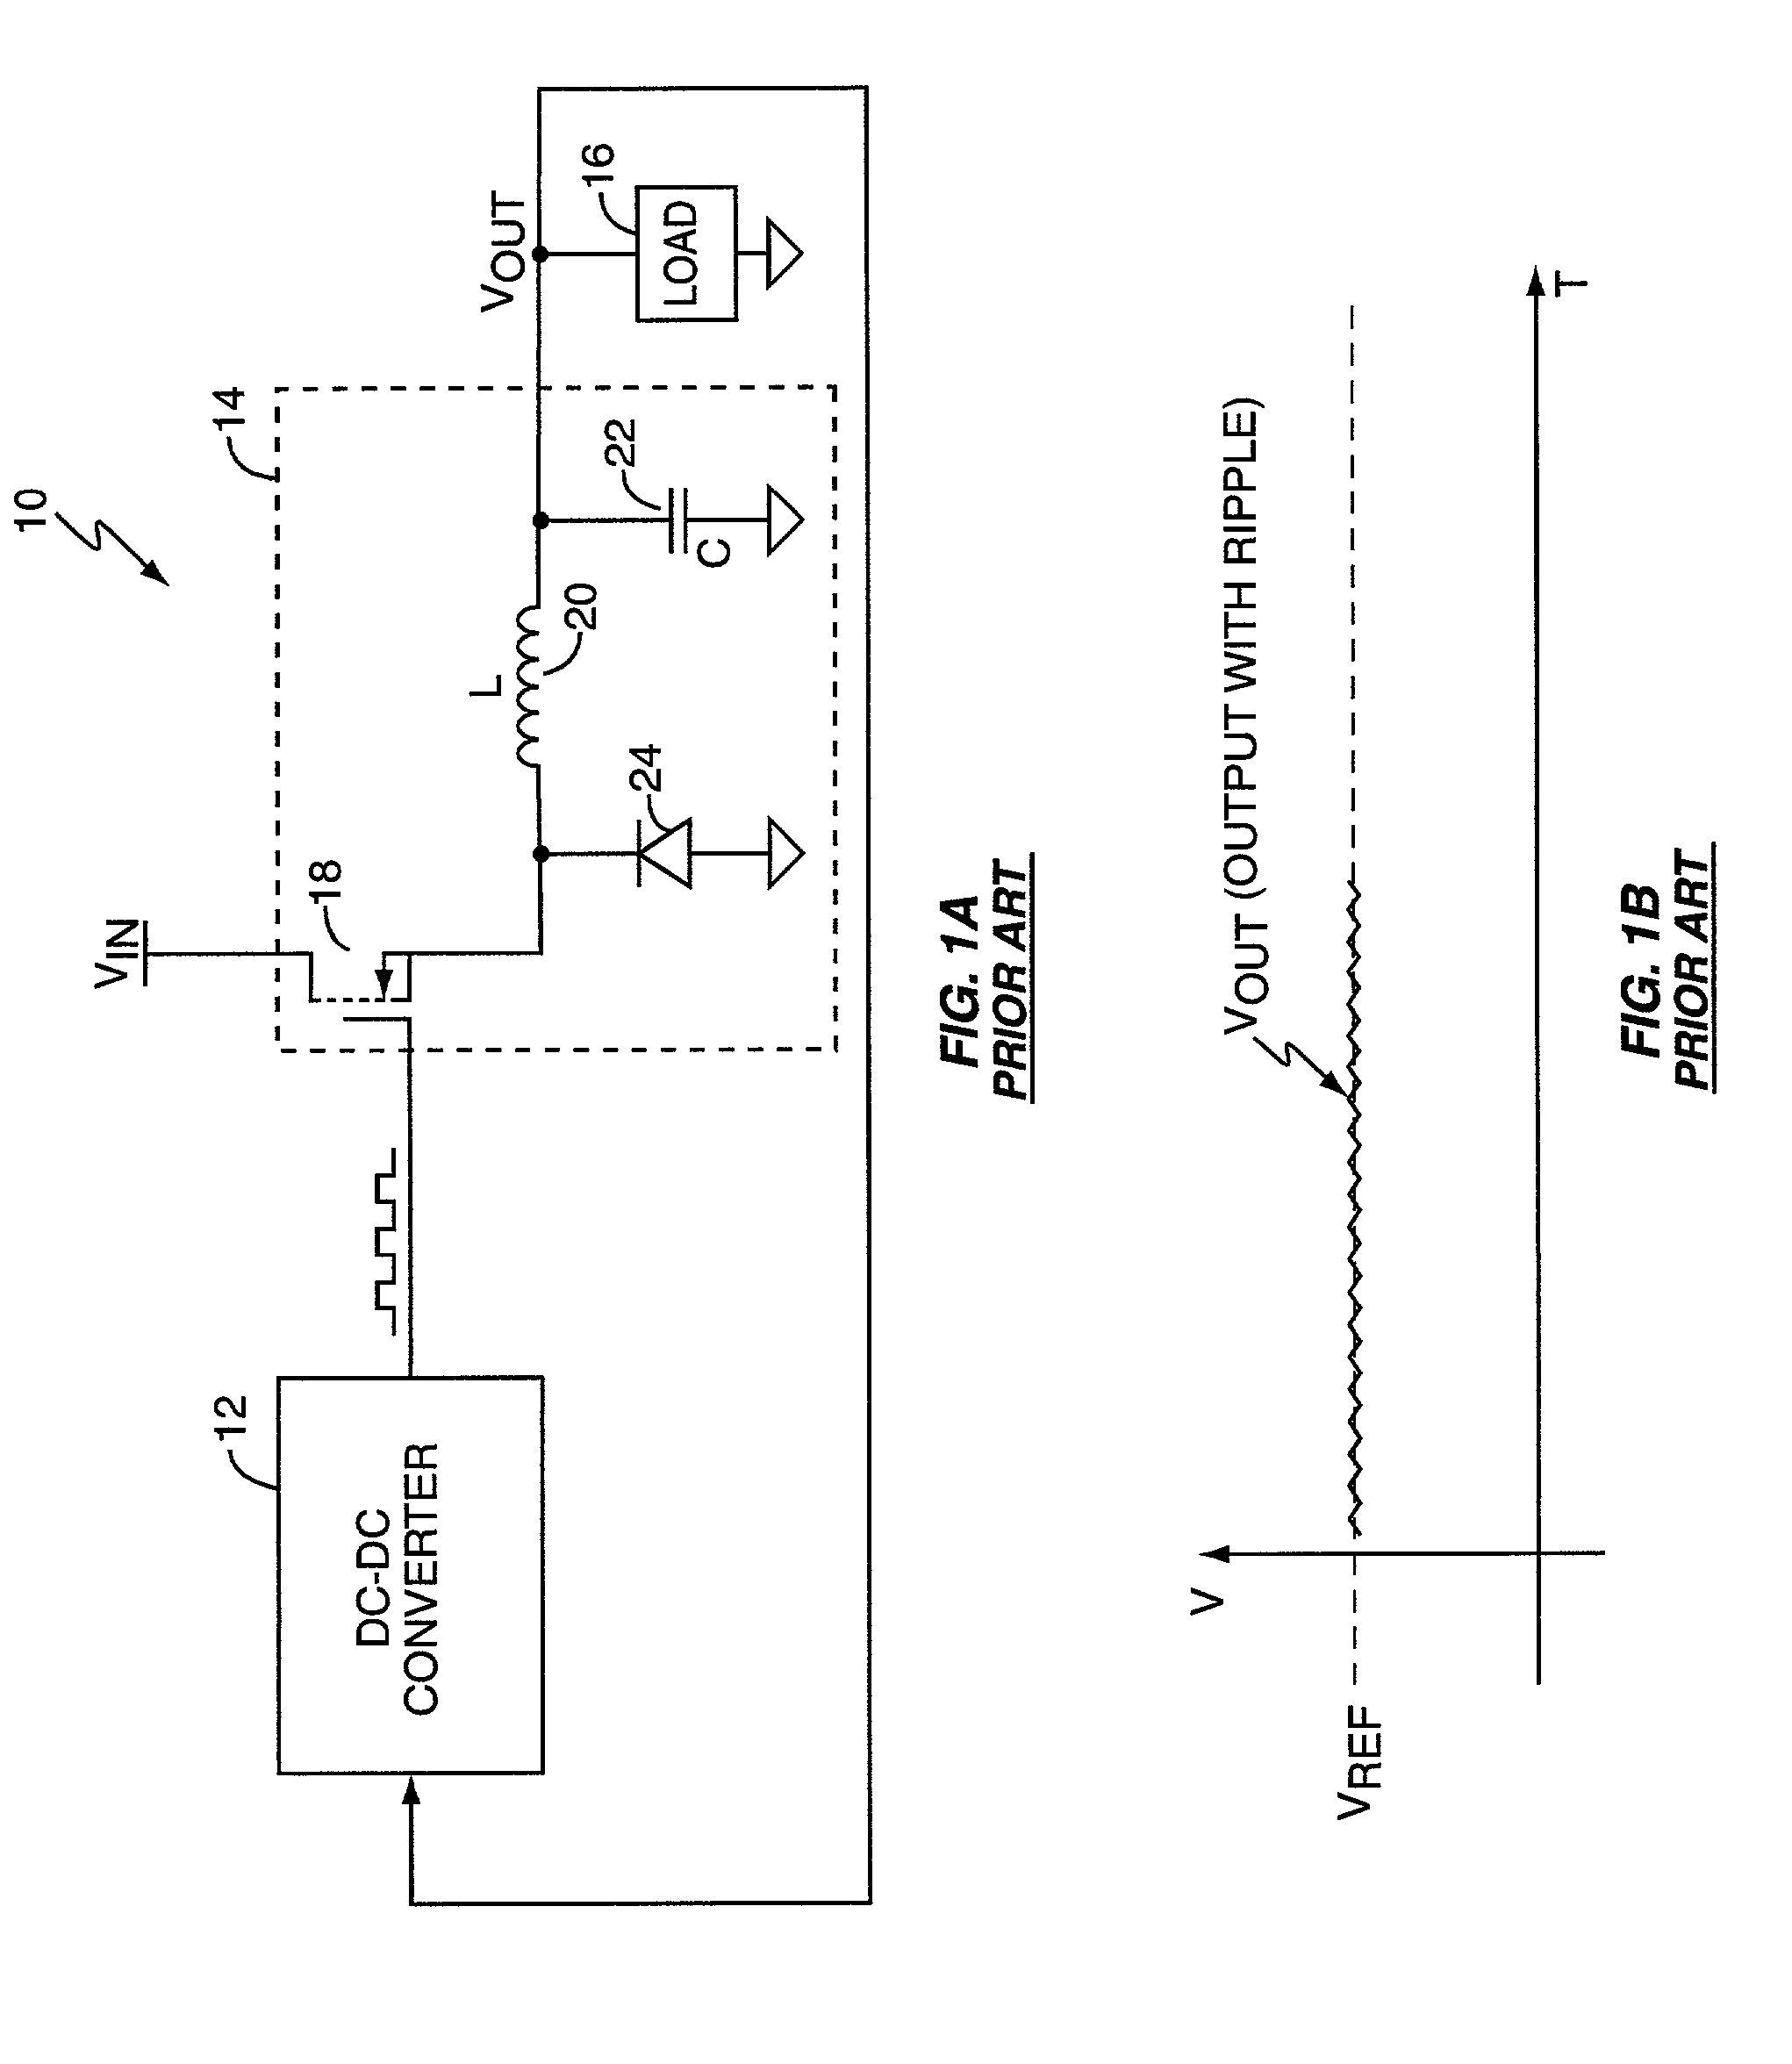 Virtual ripple generation in switch-mode power supplies